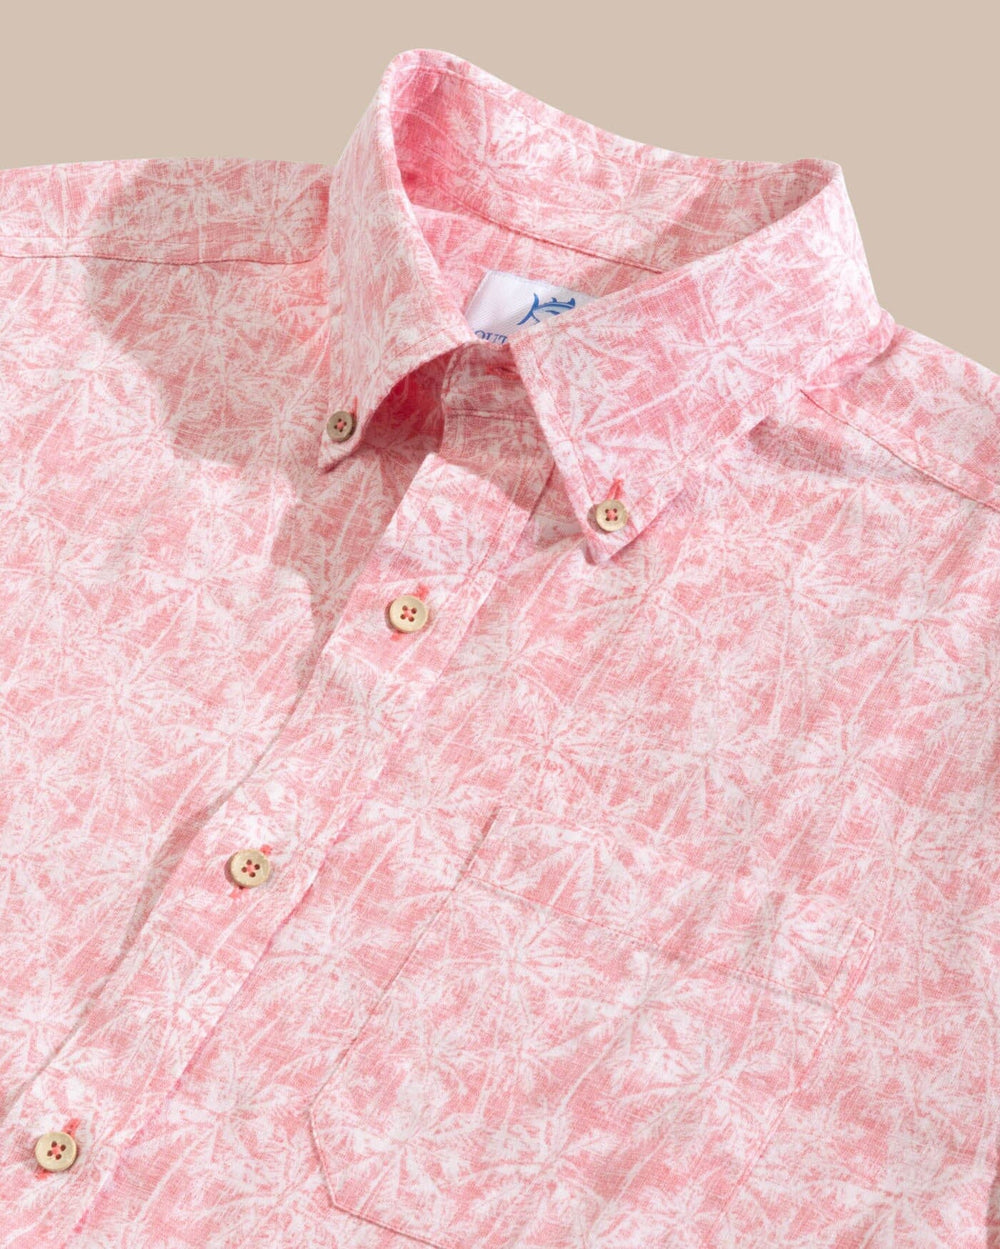 The detail view of the Southern Tide Linen Rayon Keep Palm and Carry On Print Sport Shirt by Southern Tide - Rosewood Red